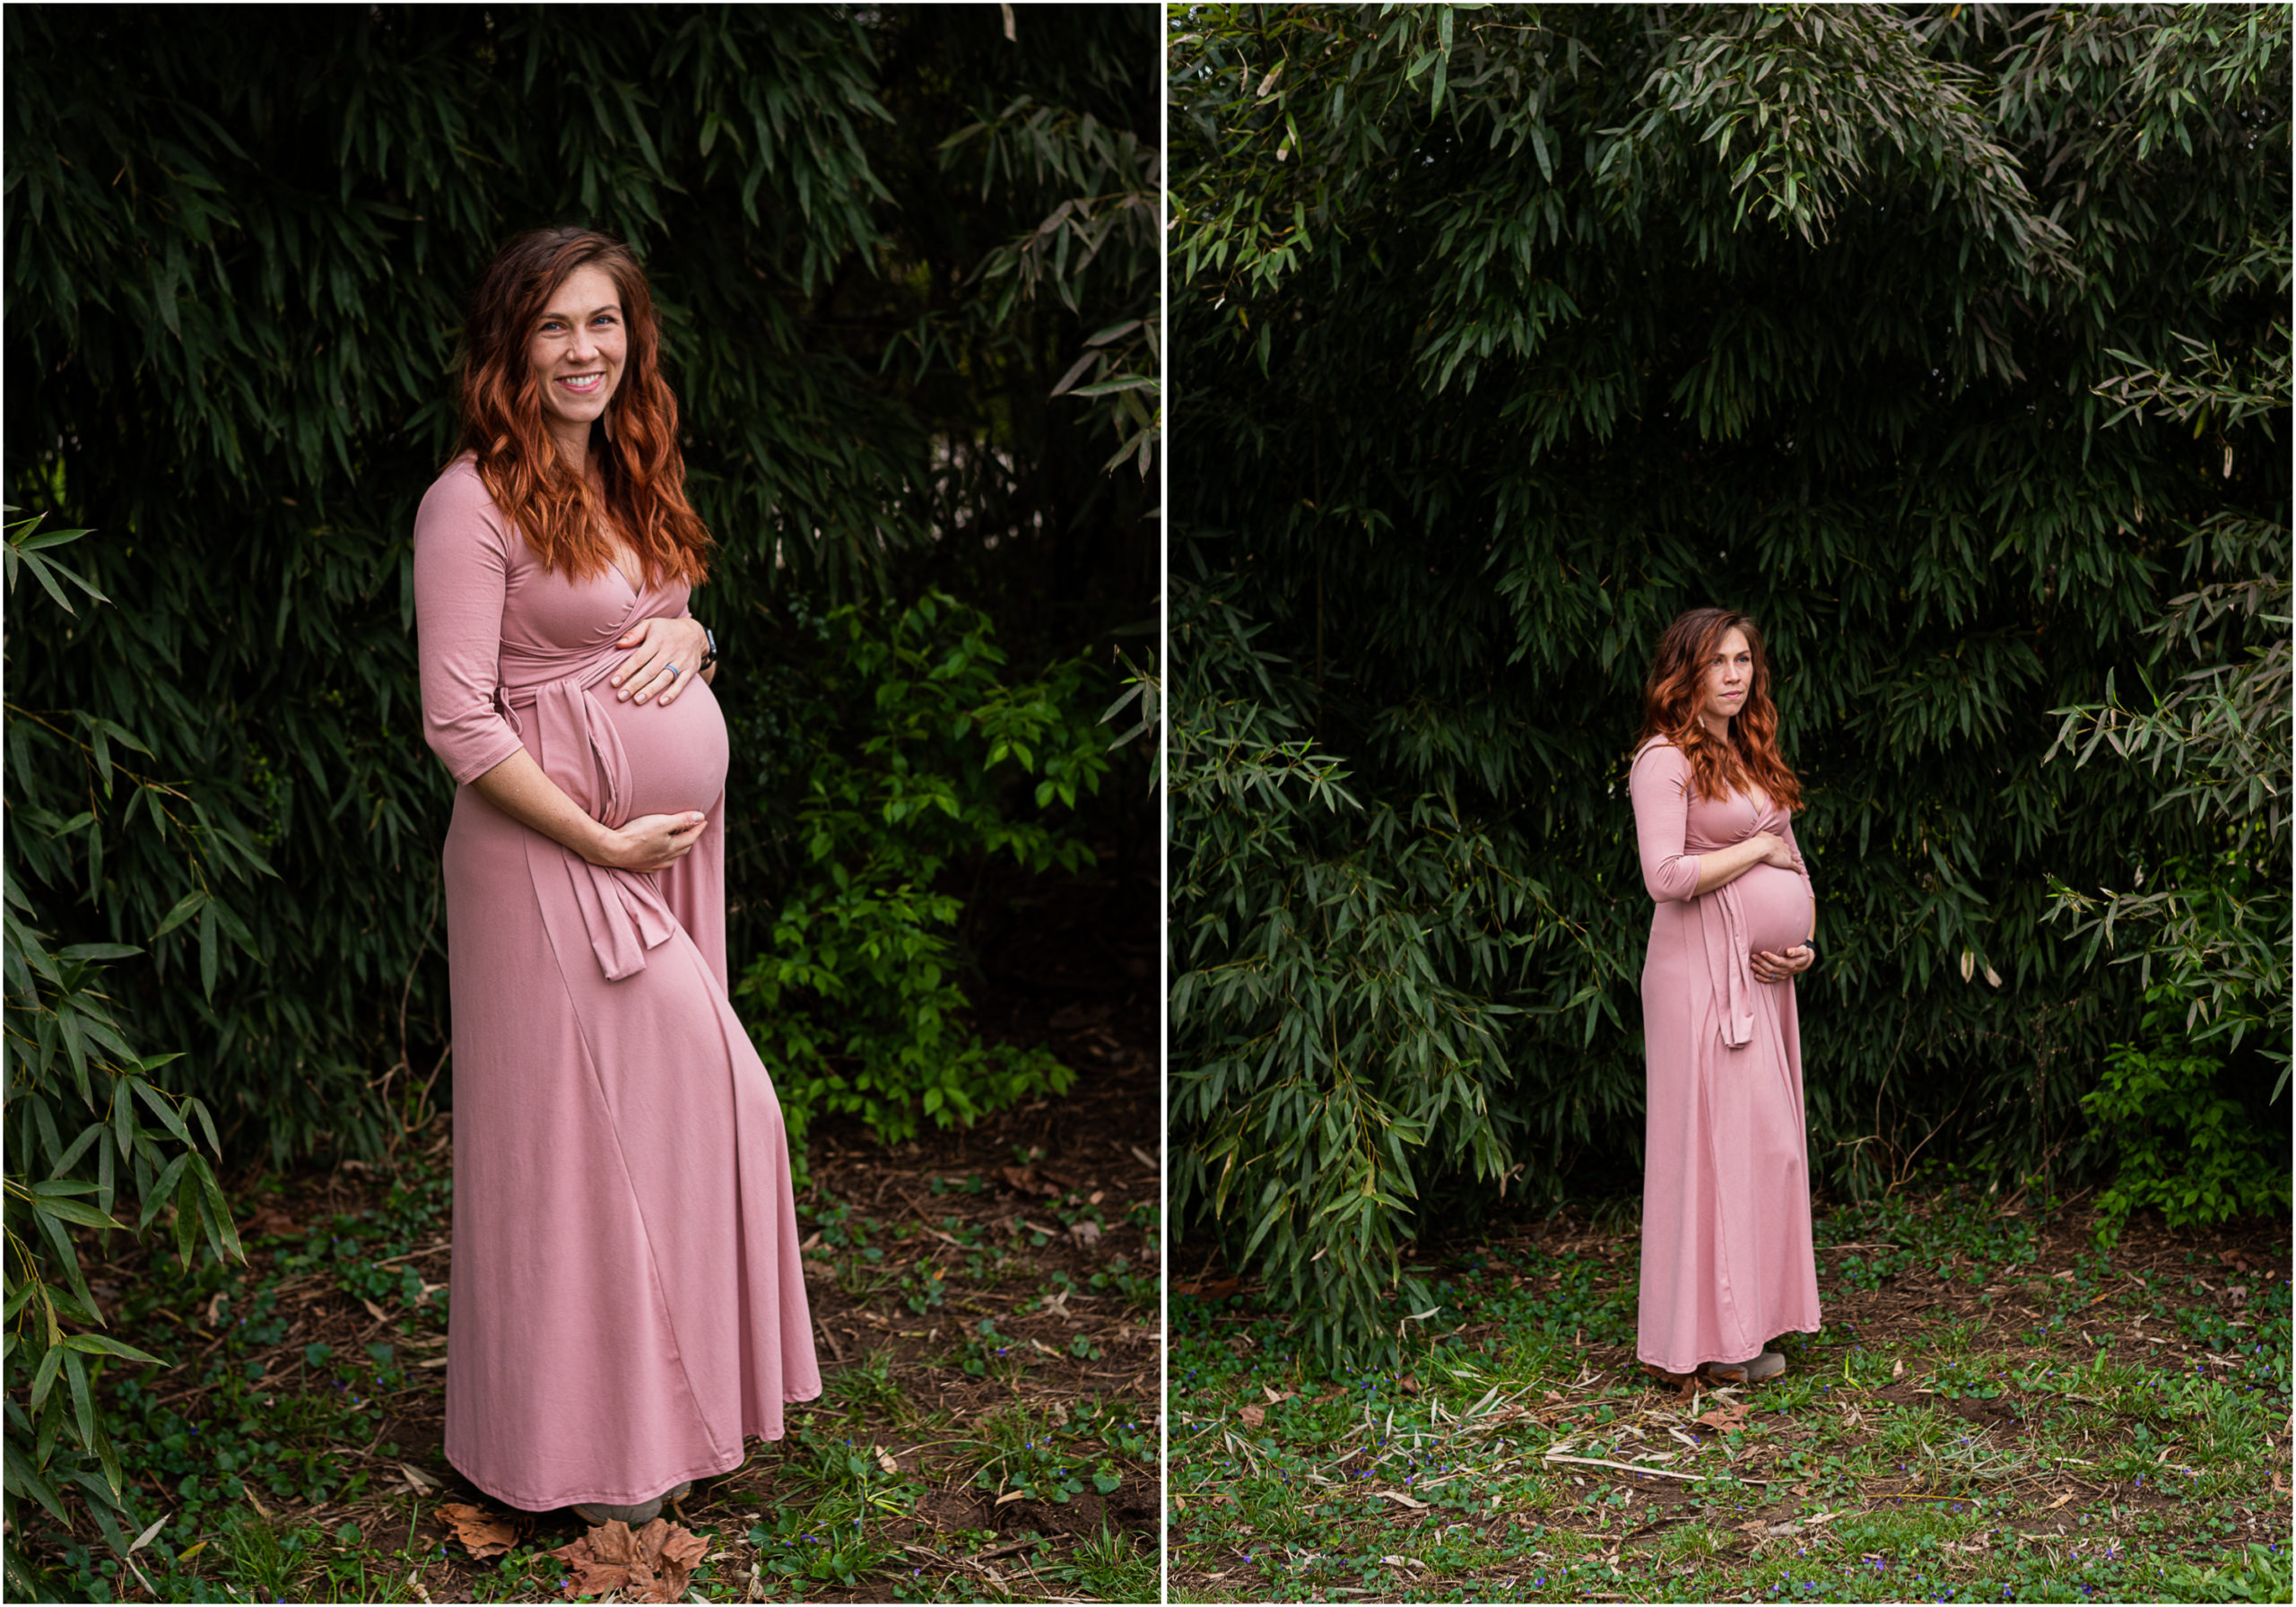 A pregnant woman holds her belly in a lush garden.